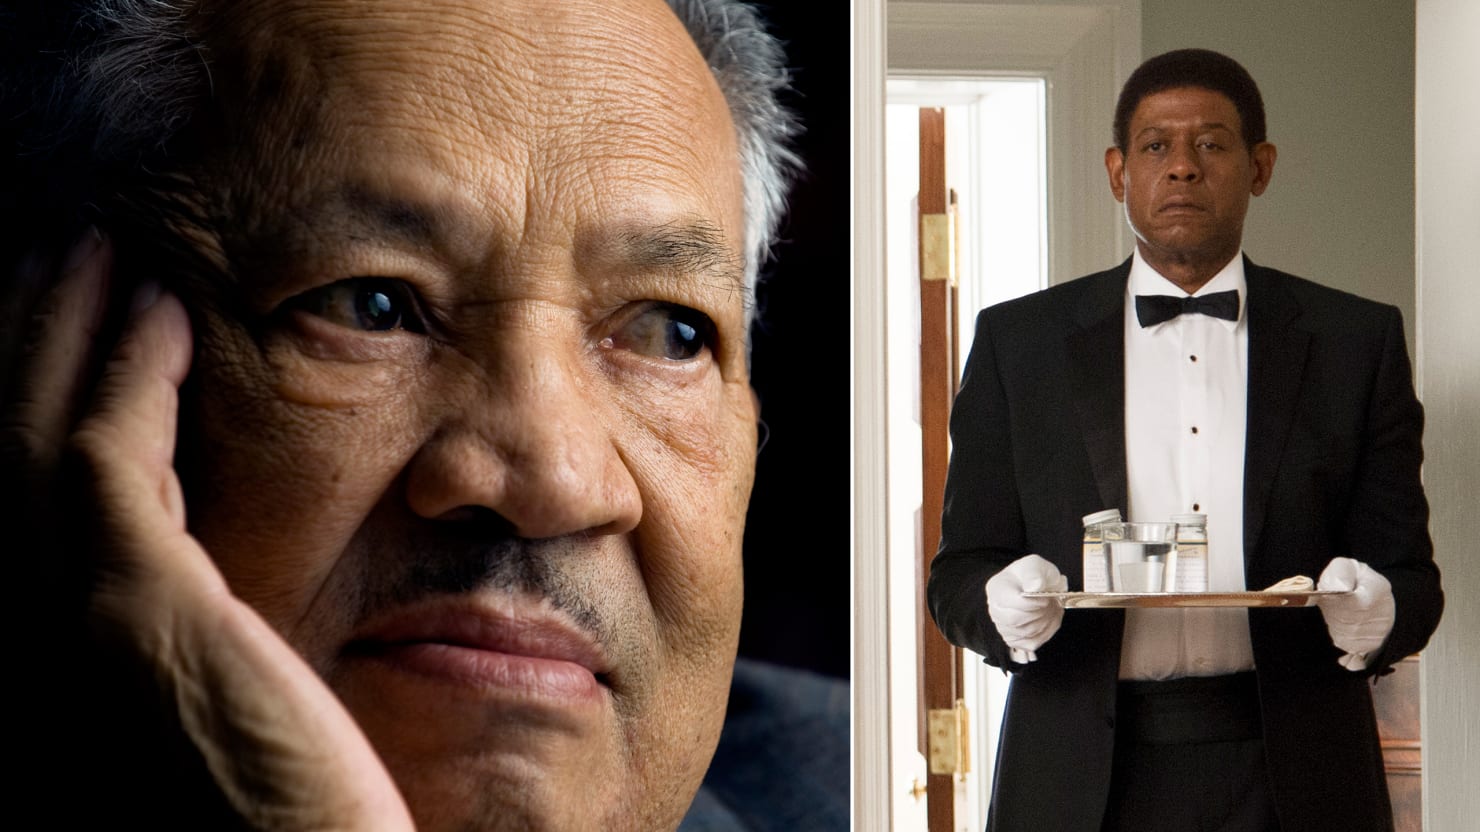 'The Butler' Fact Check: How True Is This True Story?